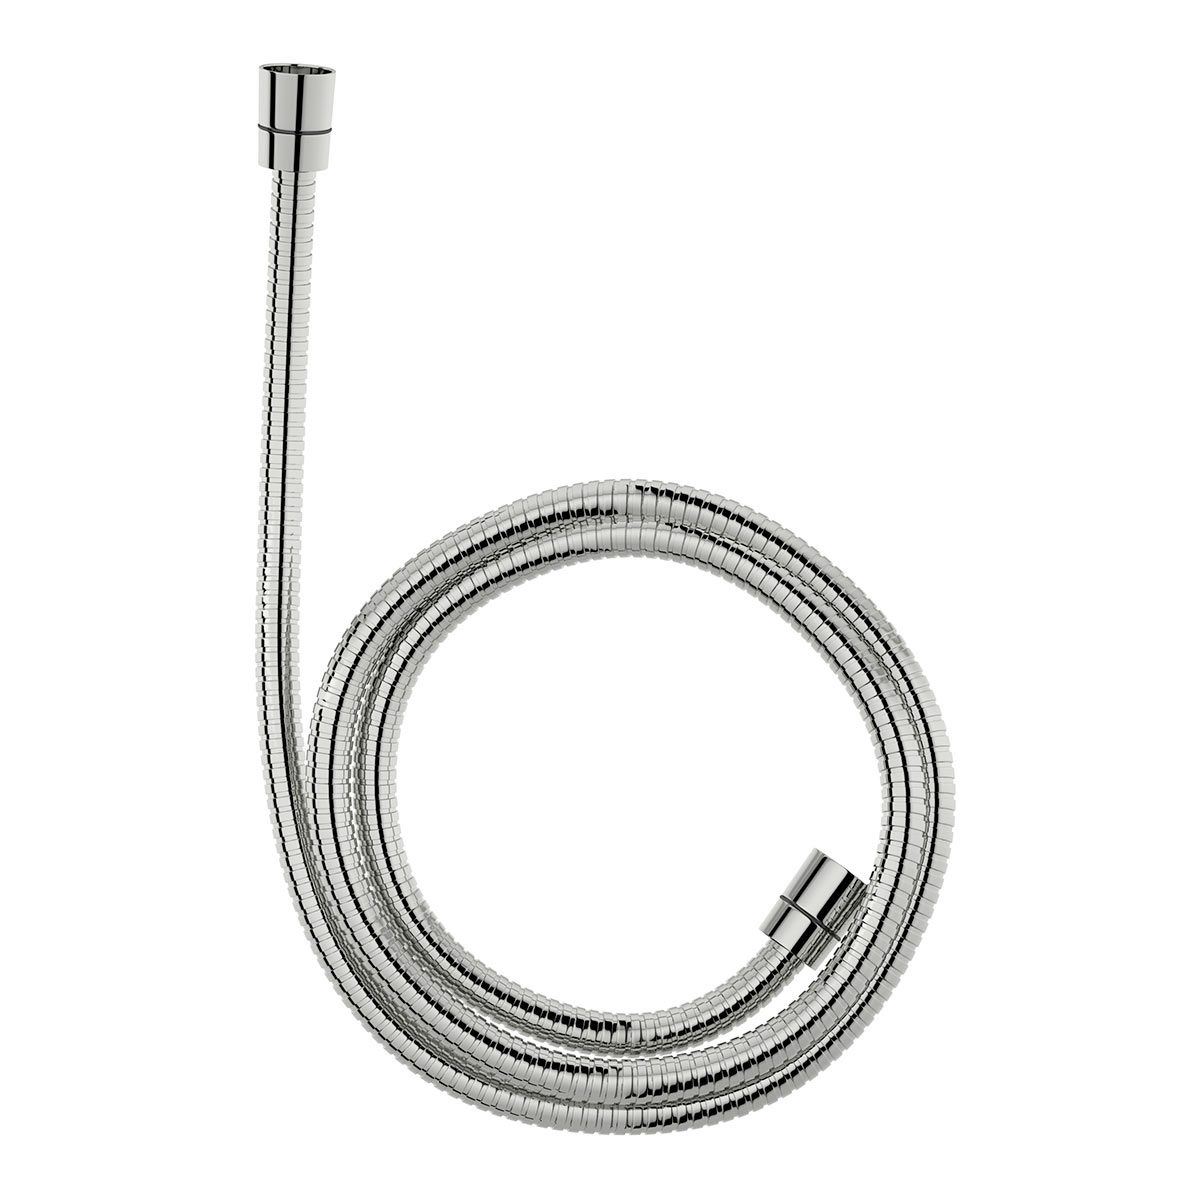 Triton 1.25m Anti-Kink Shower Hose Chrome Replacement Bathroom Home Water SS 